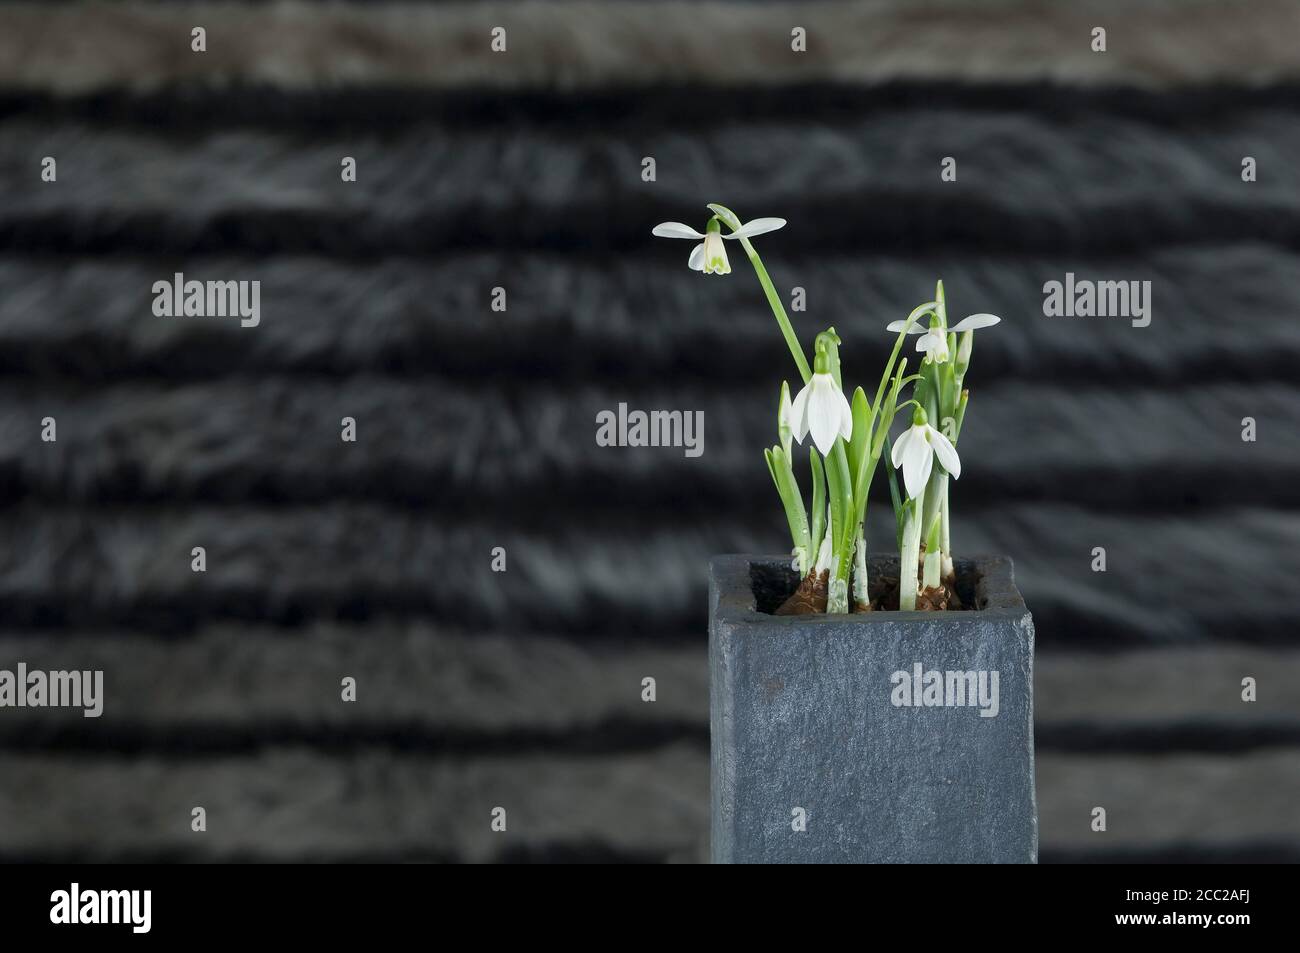 Potted plant of snowdrops, close up Stock Photo